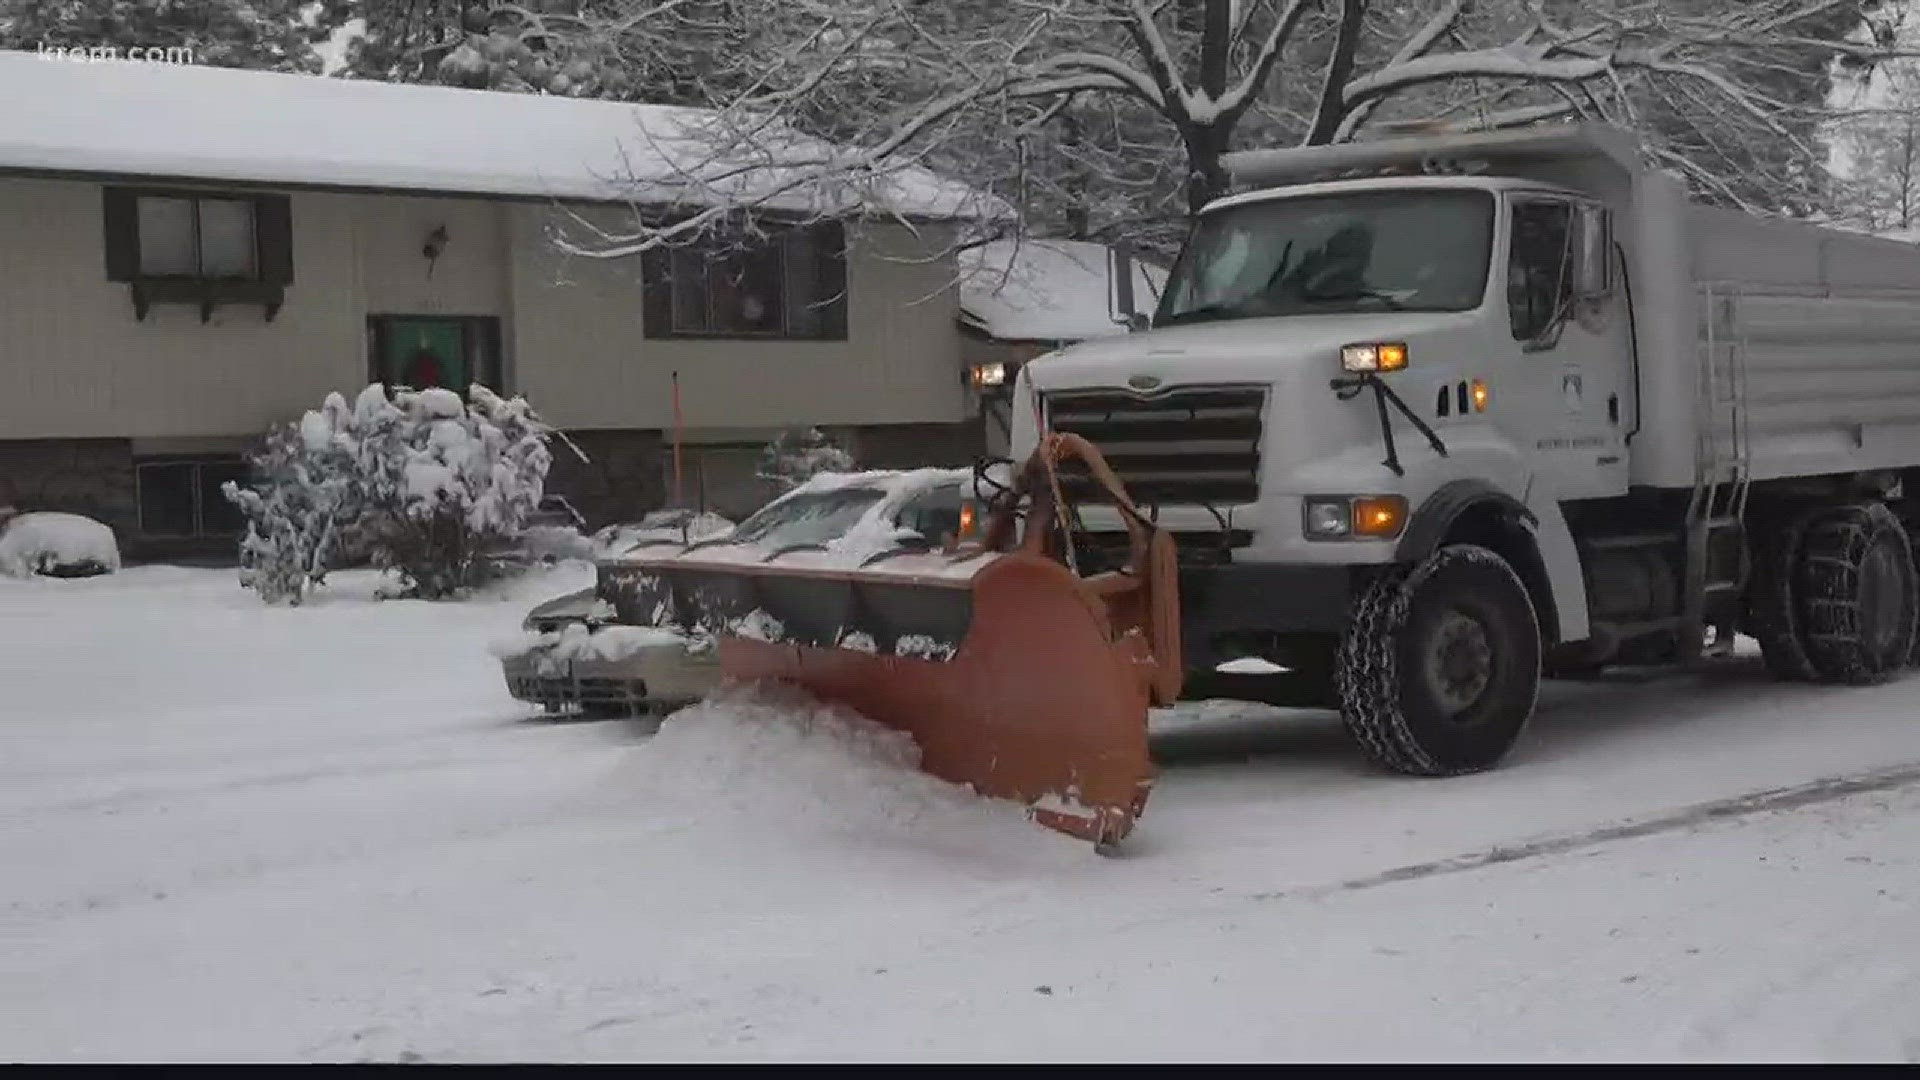 City responds to parking concerns with snow removal plan